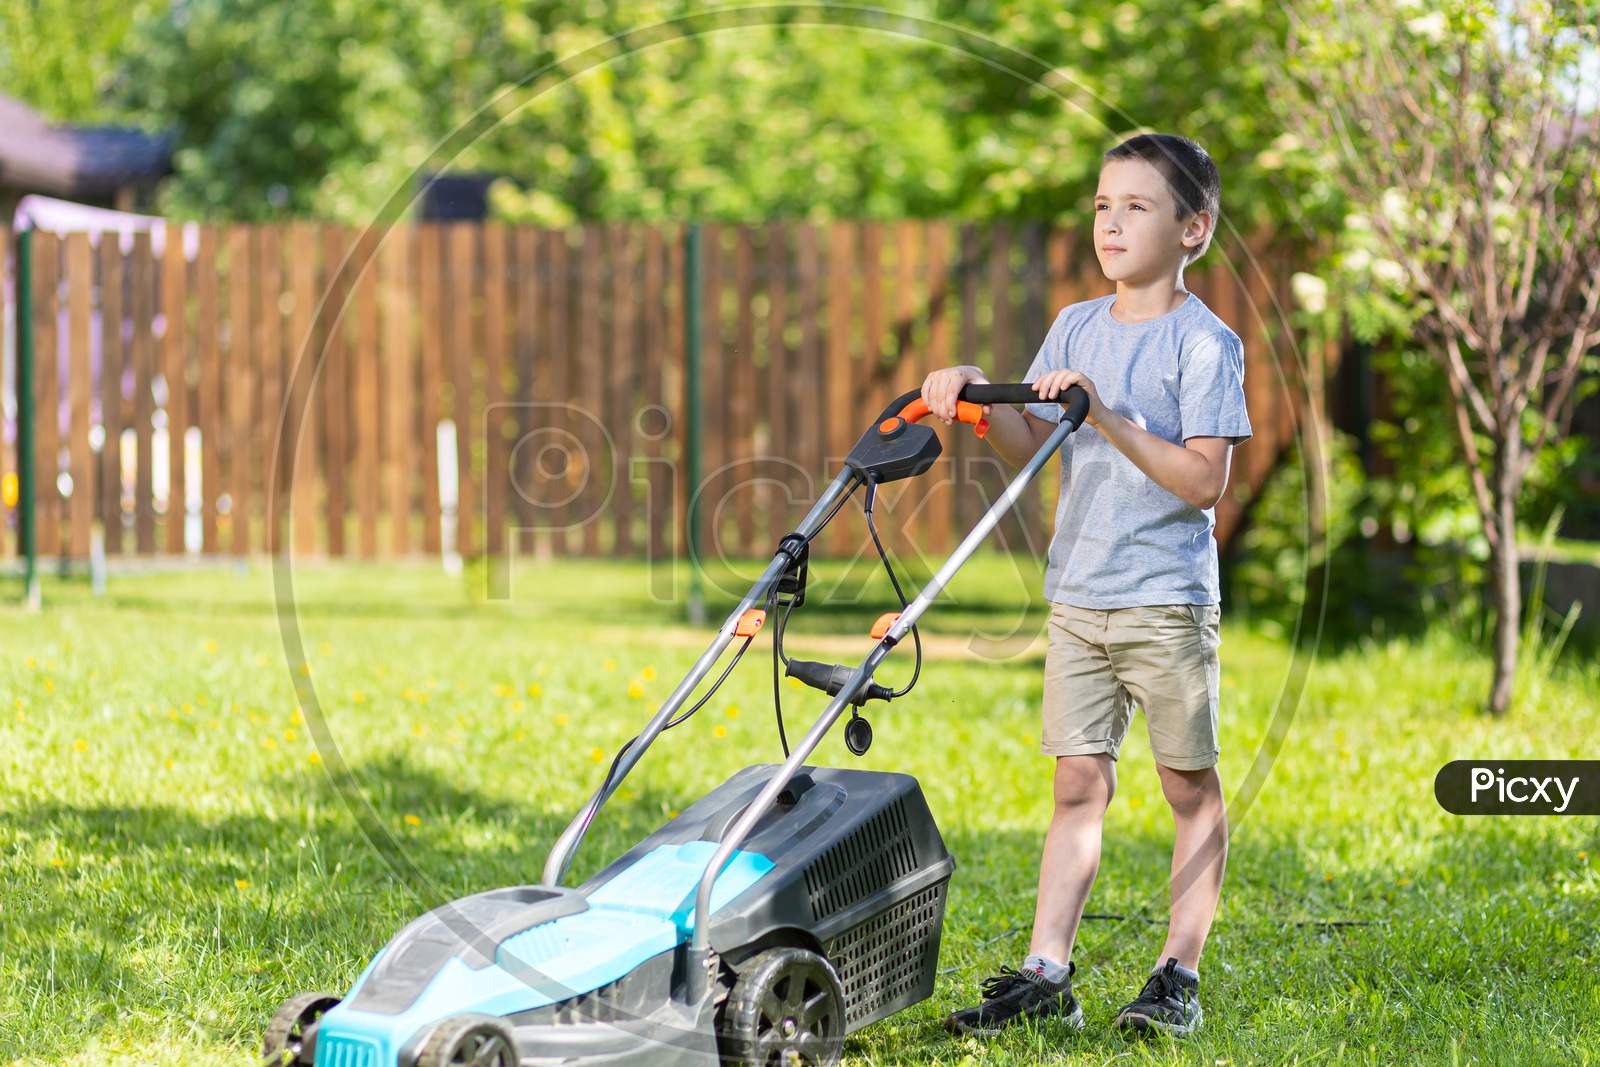 Boy Worker On The Garden Working On Mowing The Lawn With The Help Of A Modern Lawn Mower Near A Country House